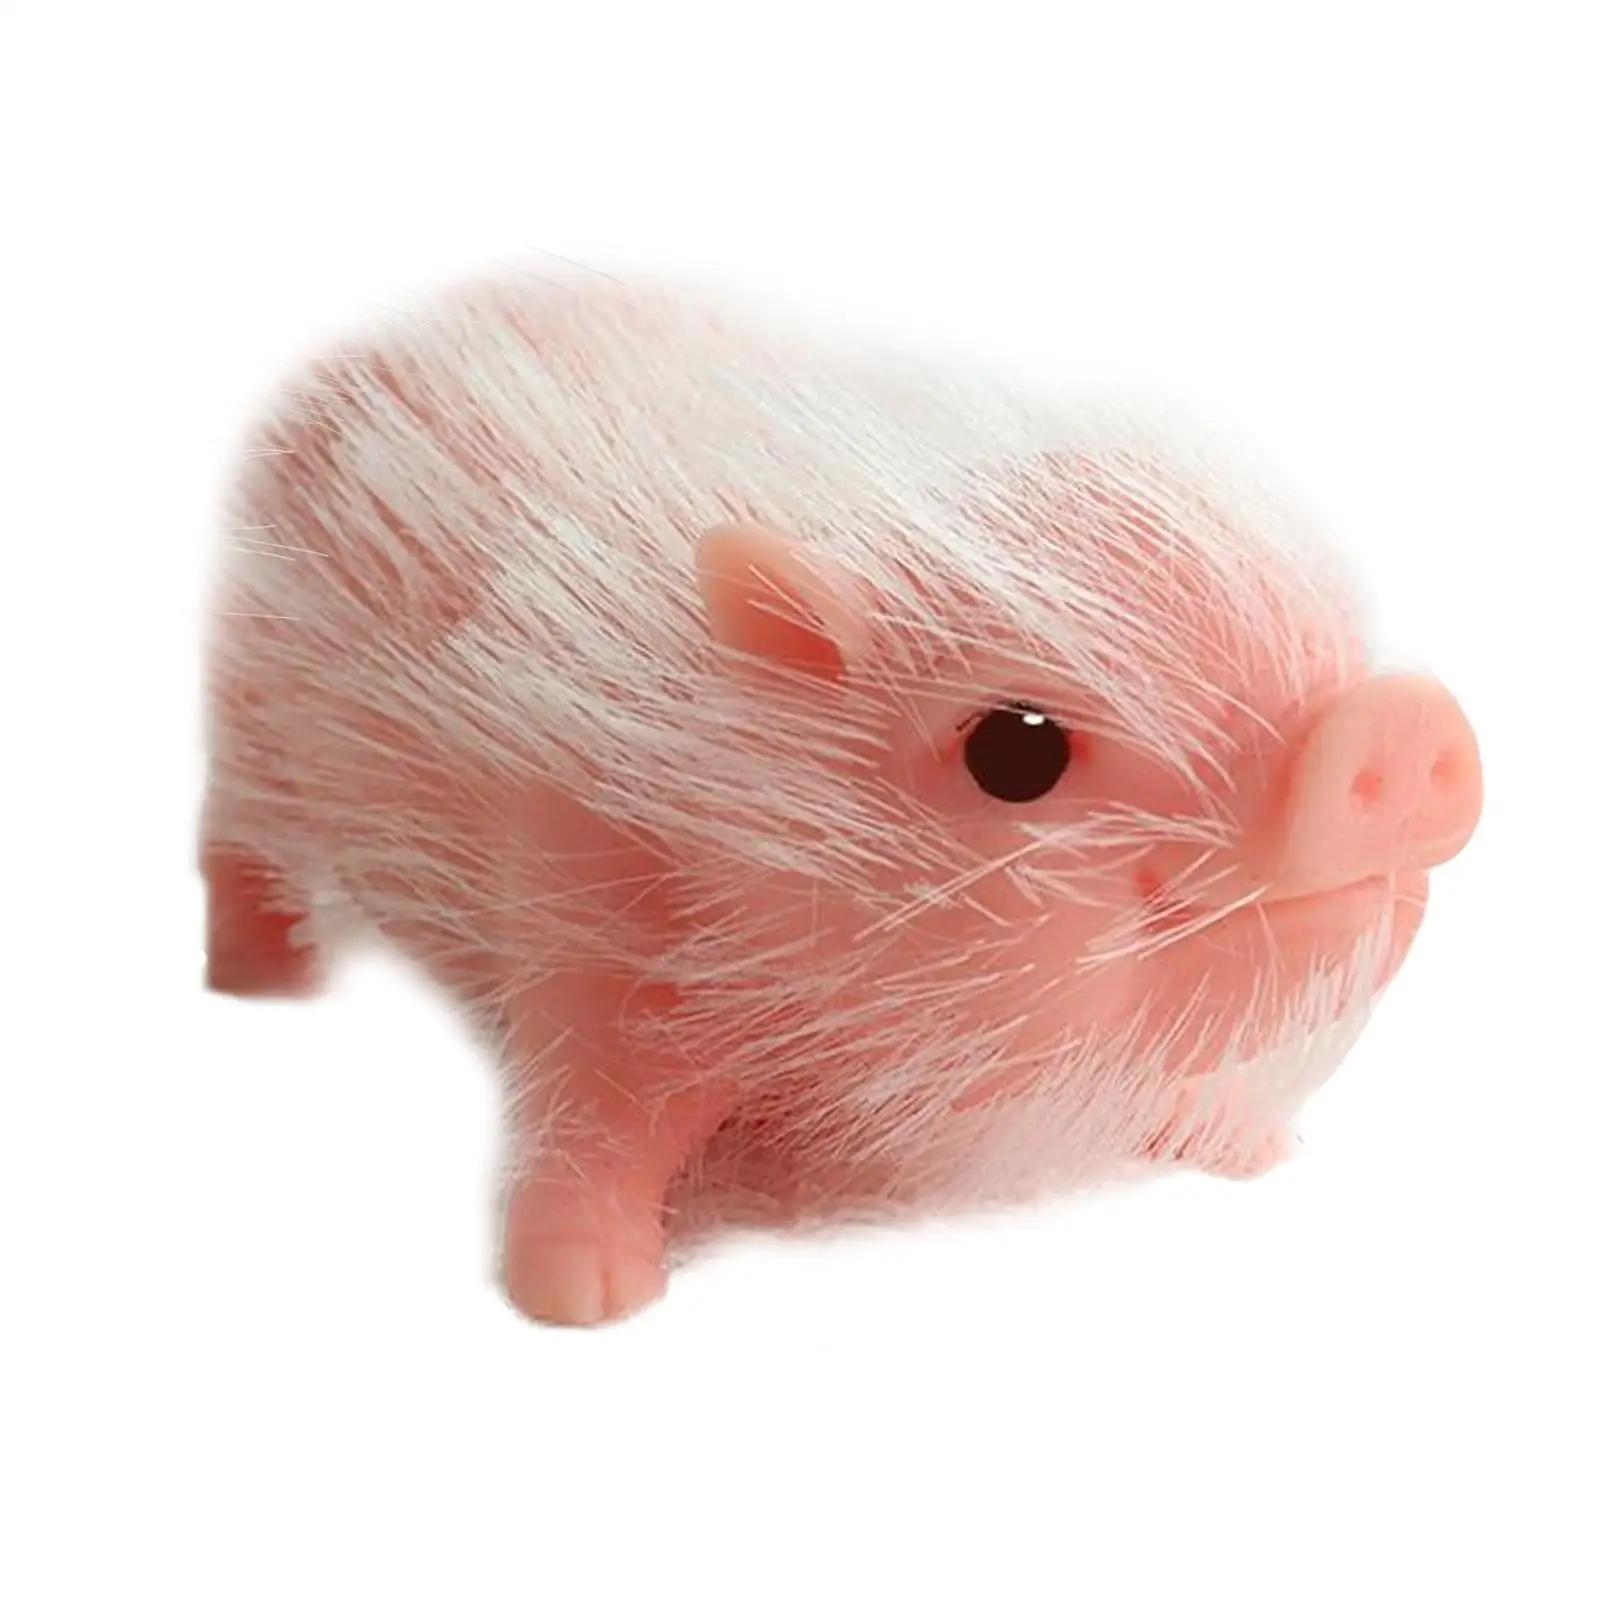 Lovely Silicone Piglet Full Body Silicon Fake Animals Soft Reborn Animals for Home Display Birthday Gift Cosplay Party Favors